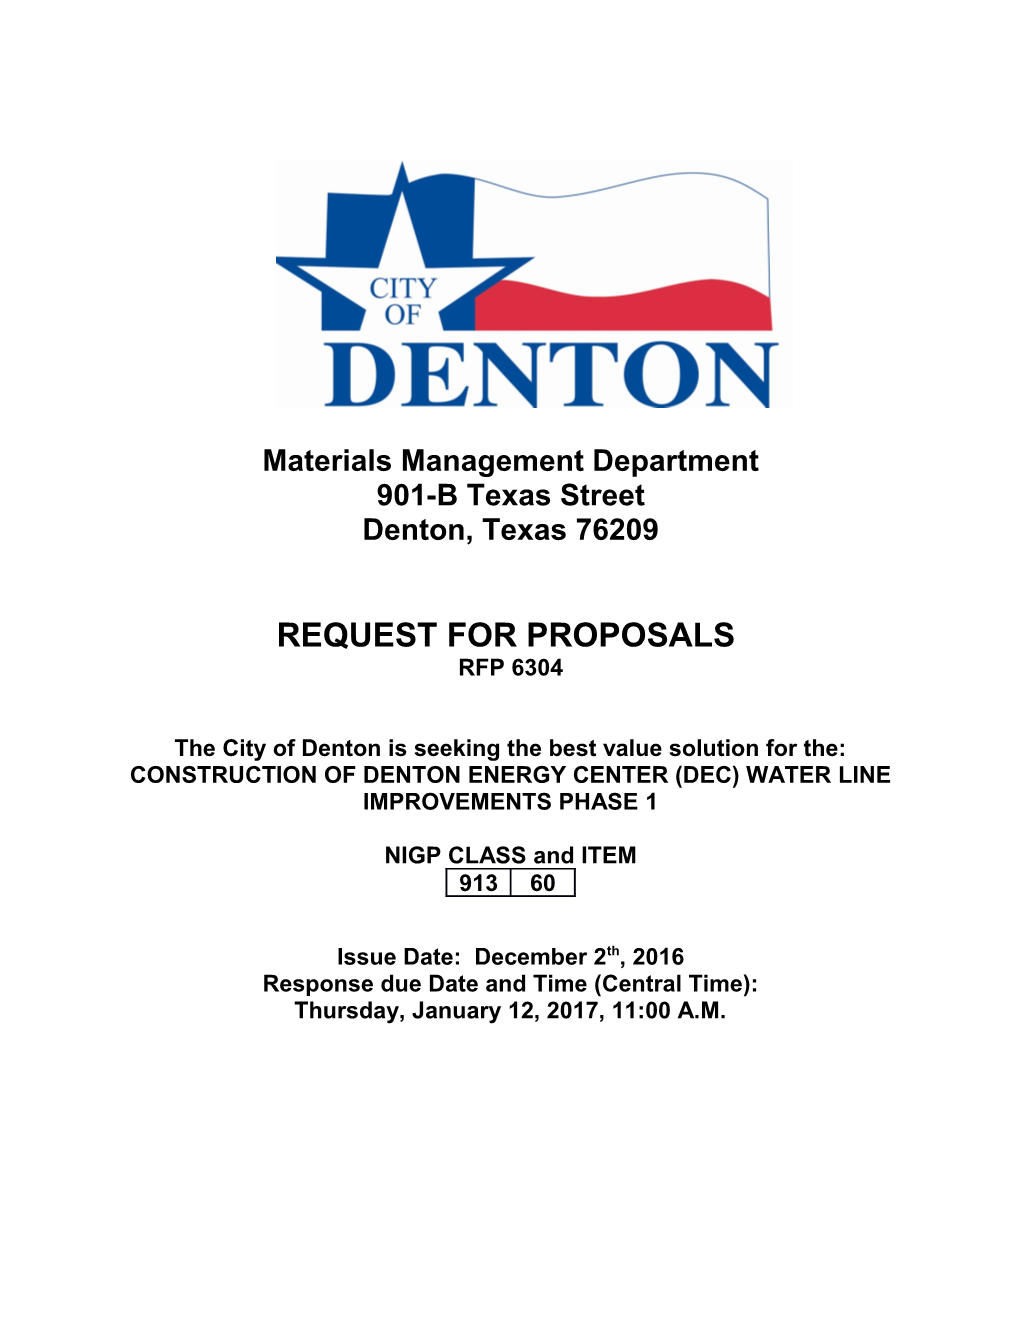 RFP for Construction of DEC Waterline Improvements, Phase 1